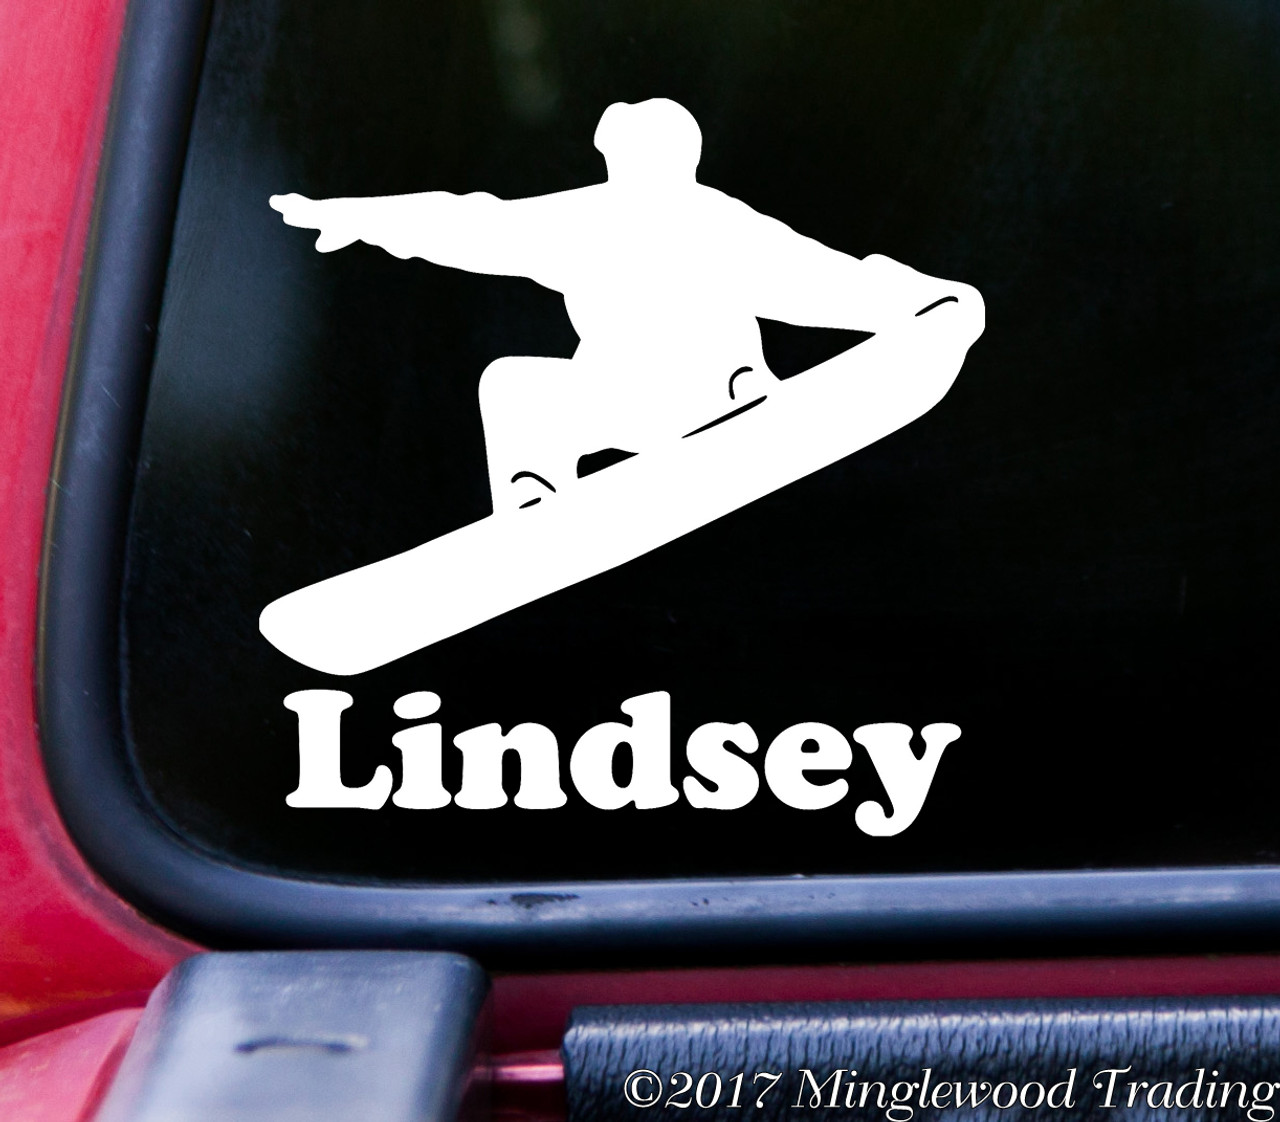 SNOWBOARDER with Personalized Name Vinyl Sticker - Snurfer - Die Cut Decal